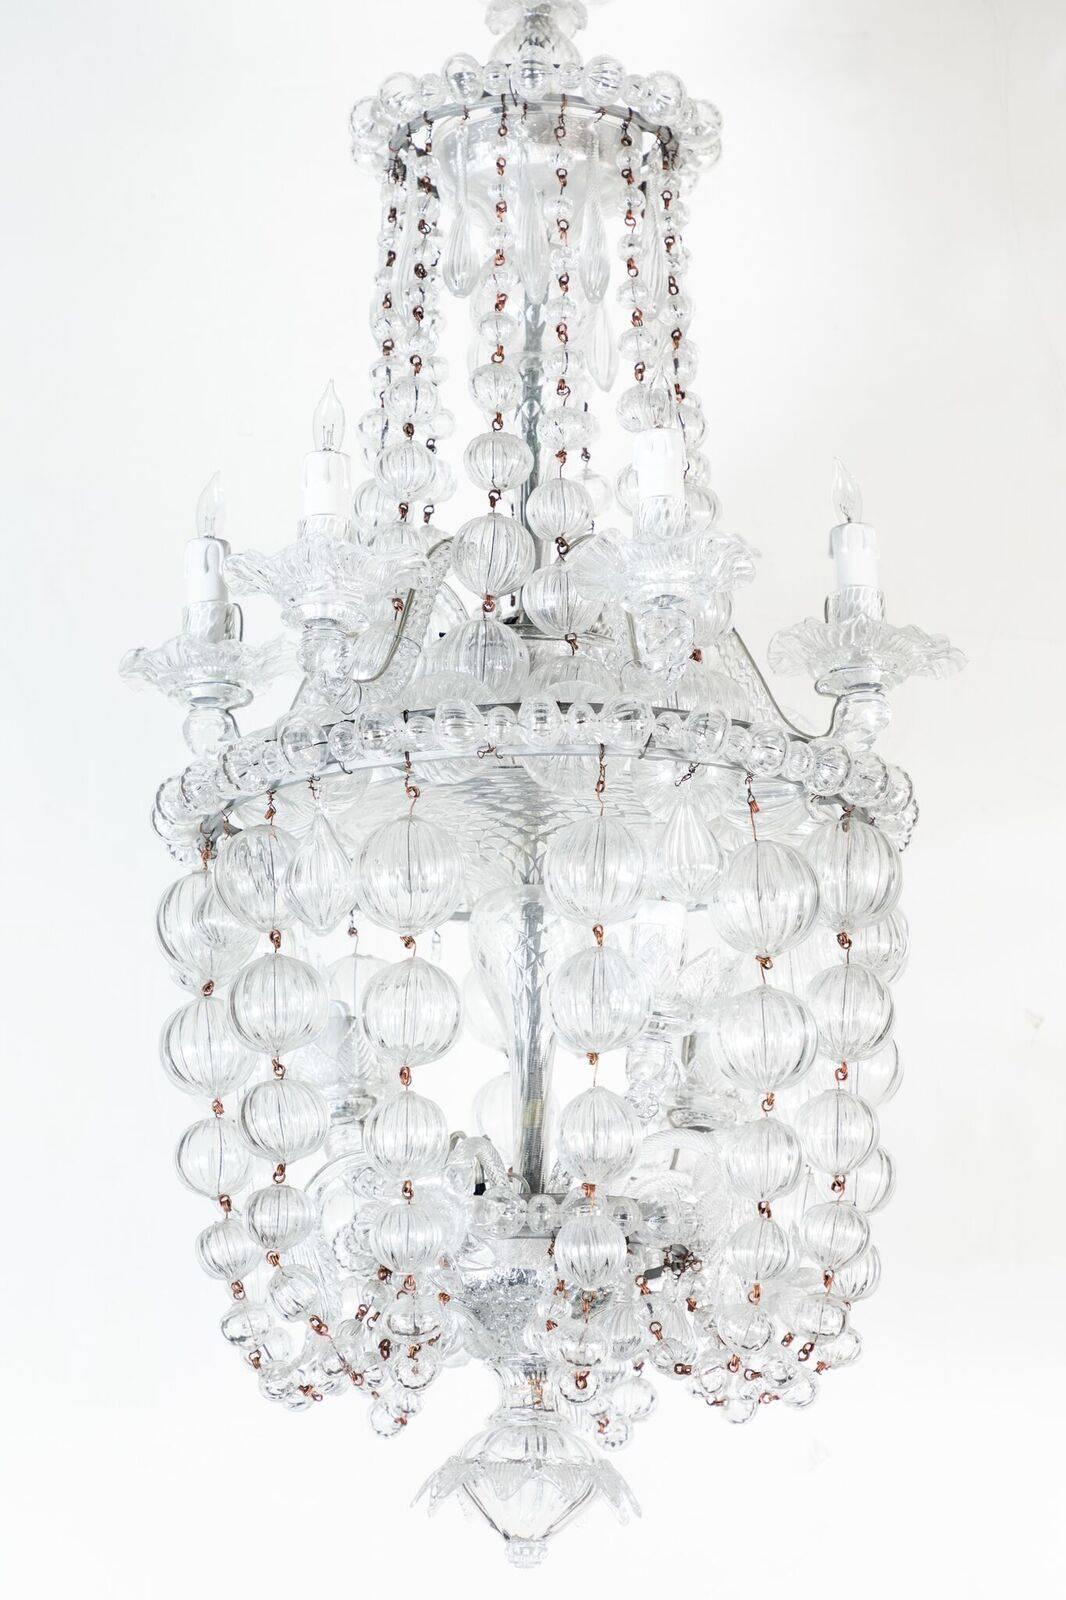 Elegant, Murano glass chandelier with a rare and appealing shape, featuring two tiers of cascading strands of lobed, glass spheres between a circle of six lights. Three more bulbs illuminate the interior.